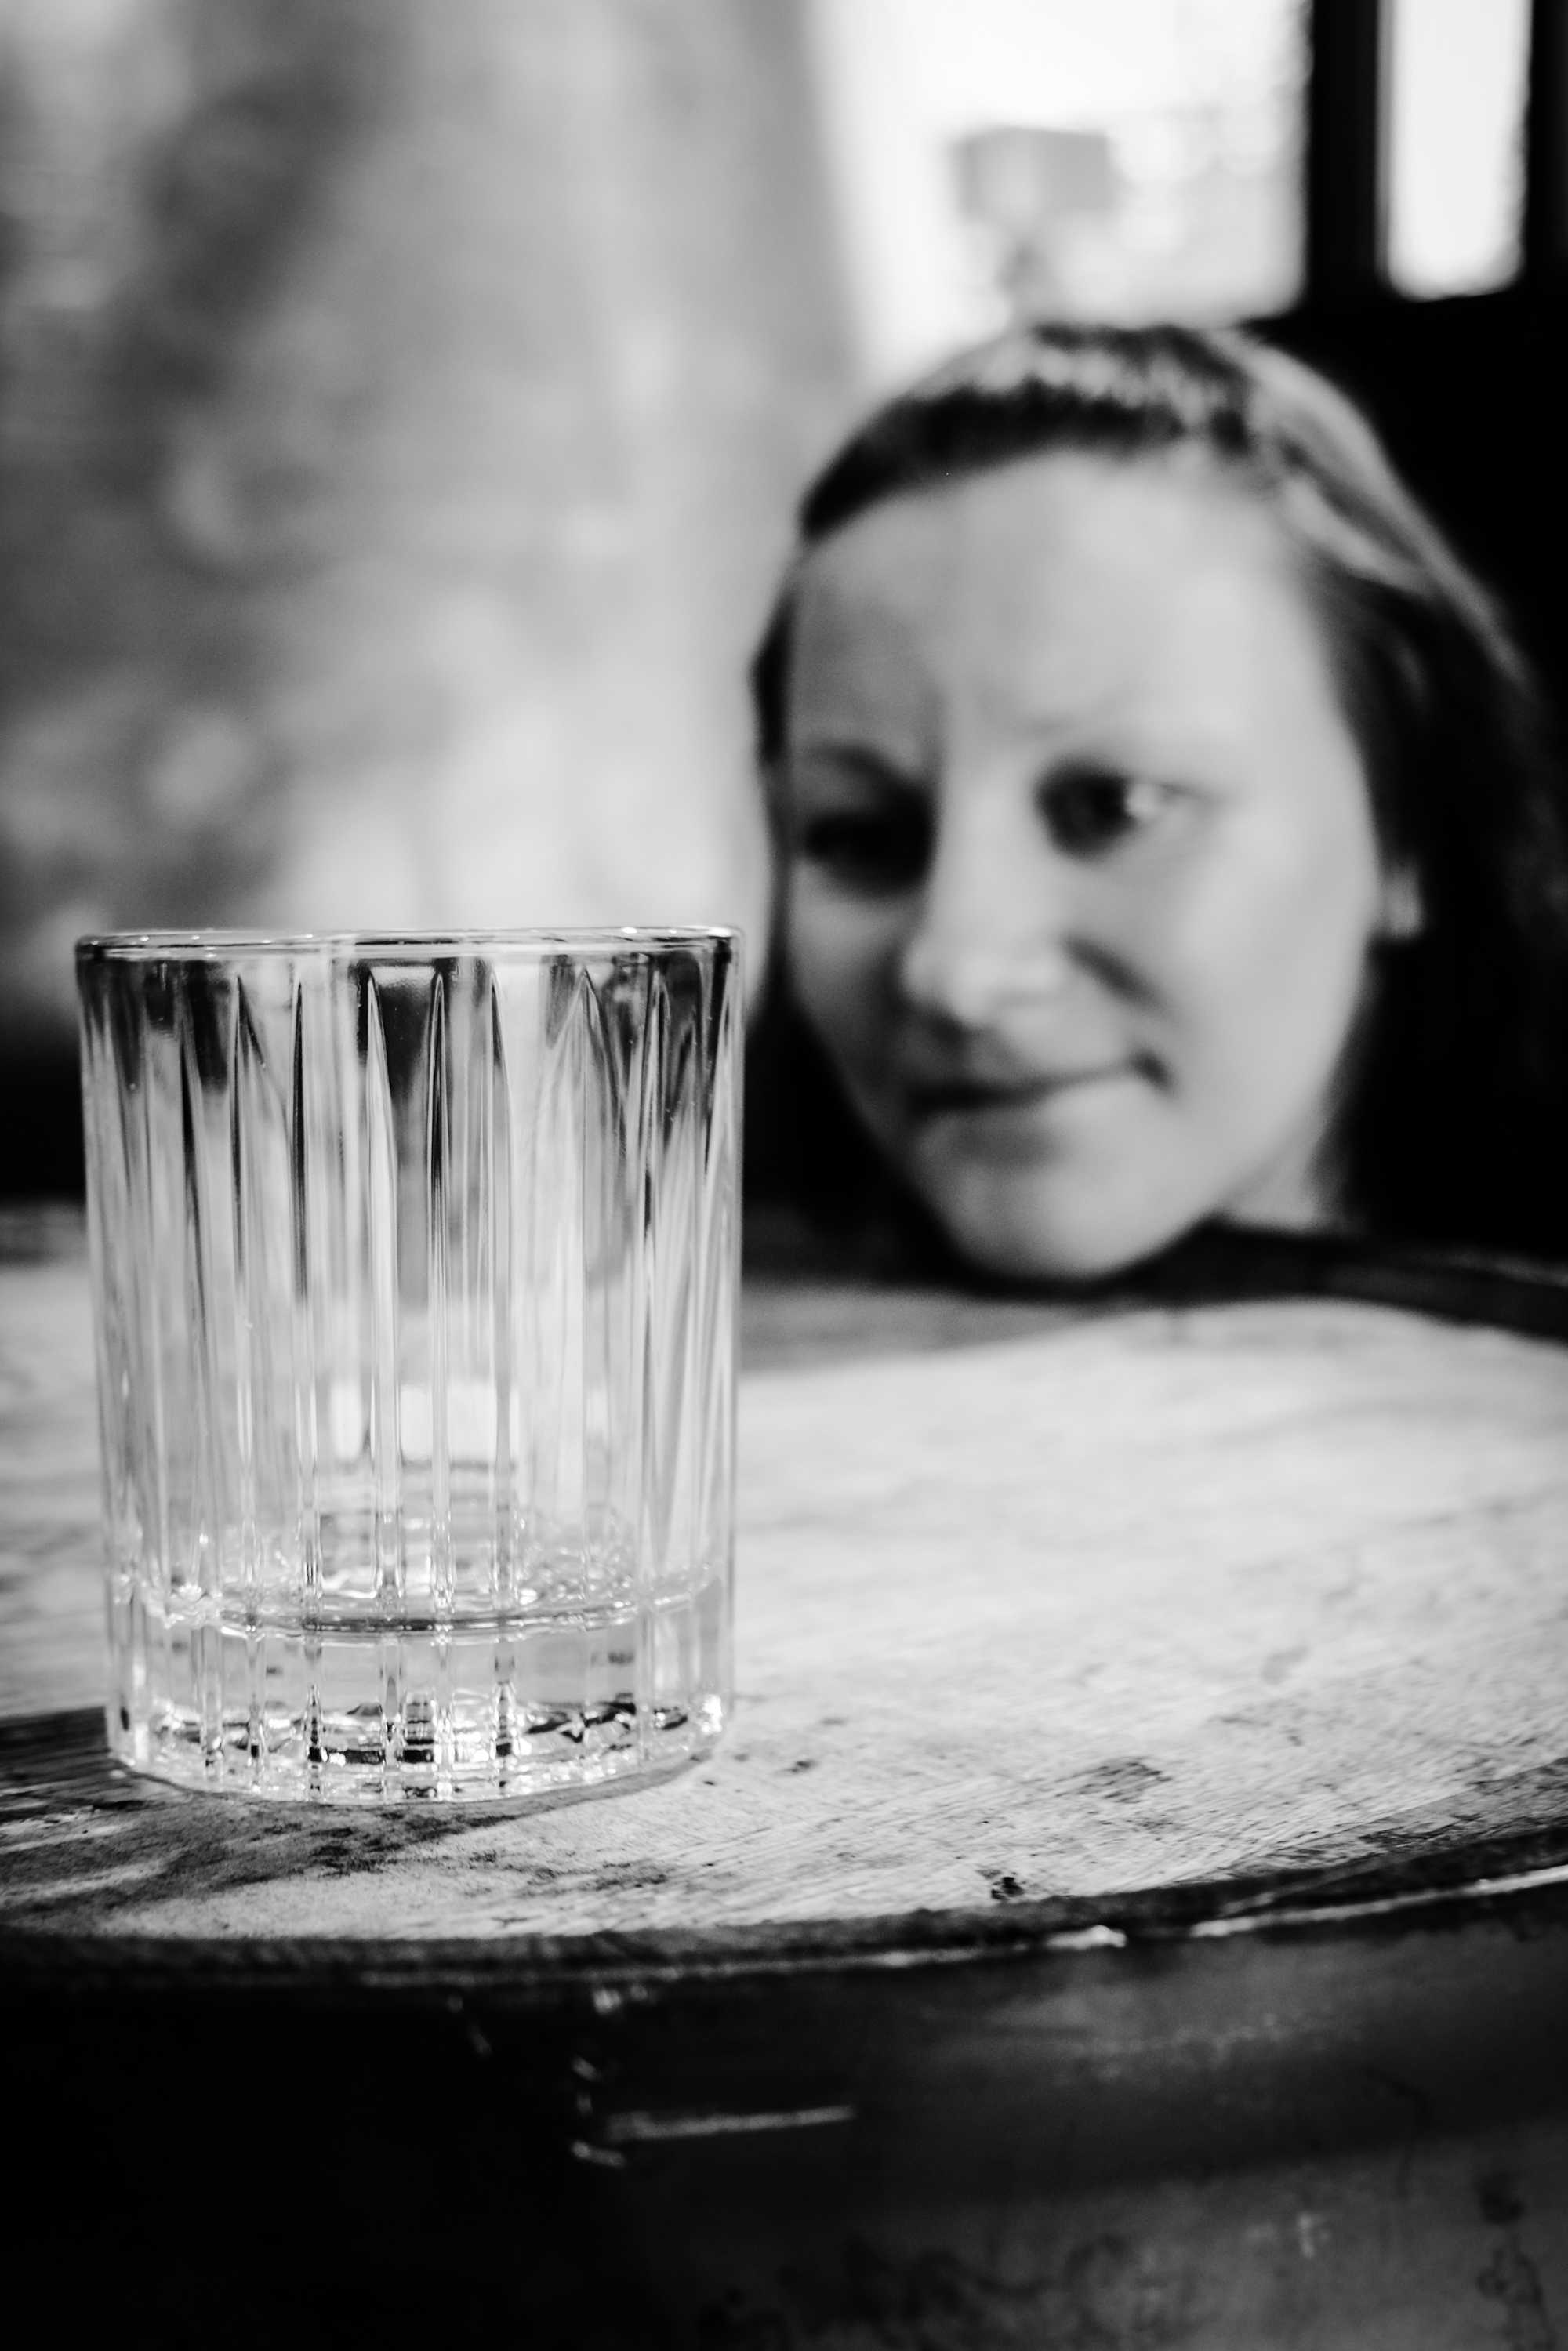 Woman looking at an empty tumbler glass